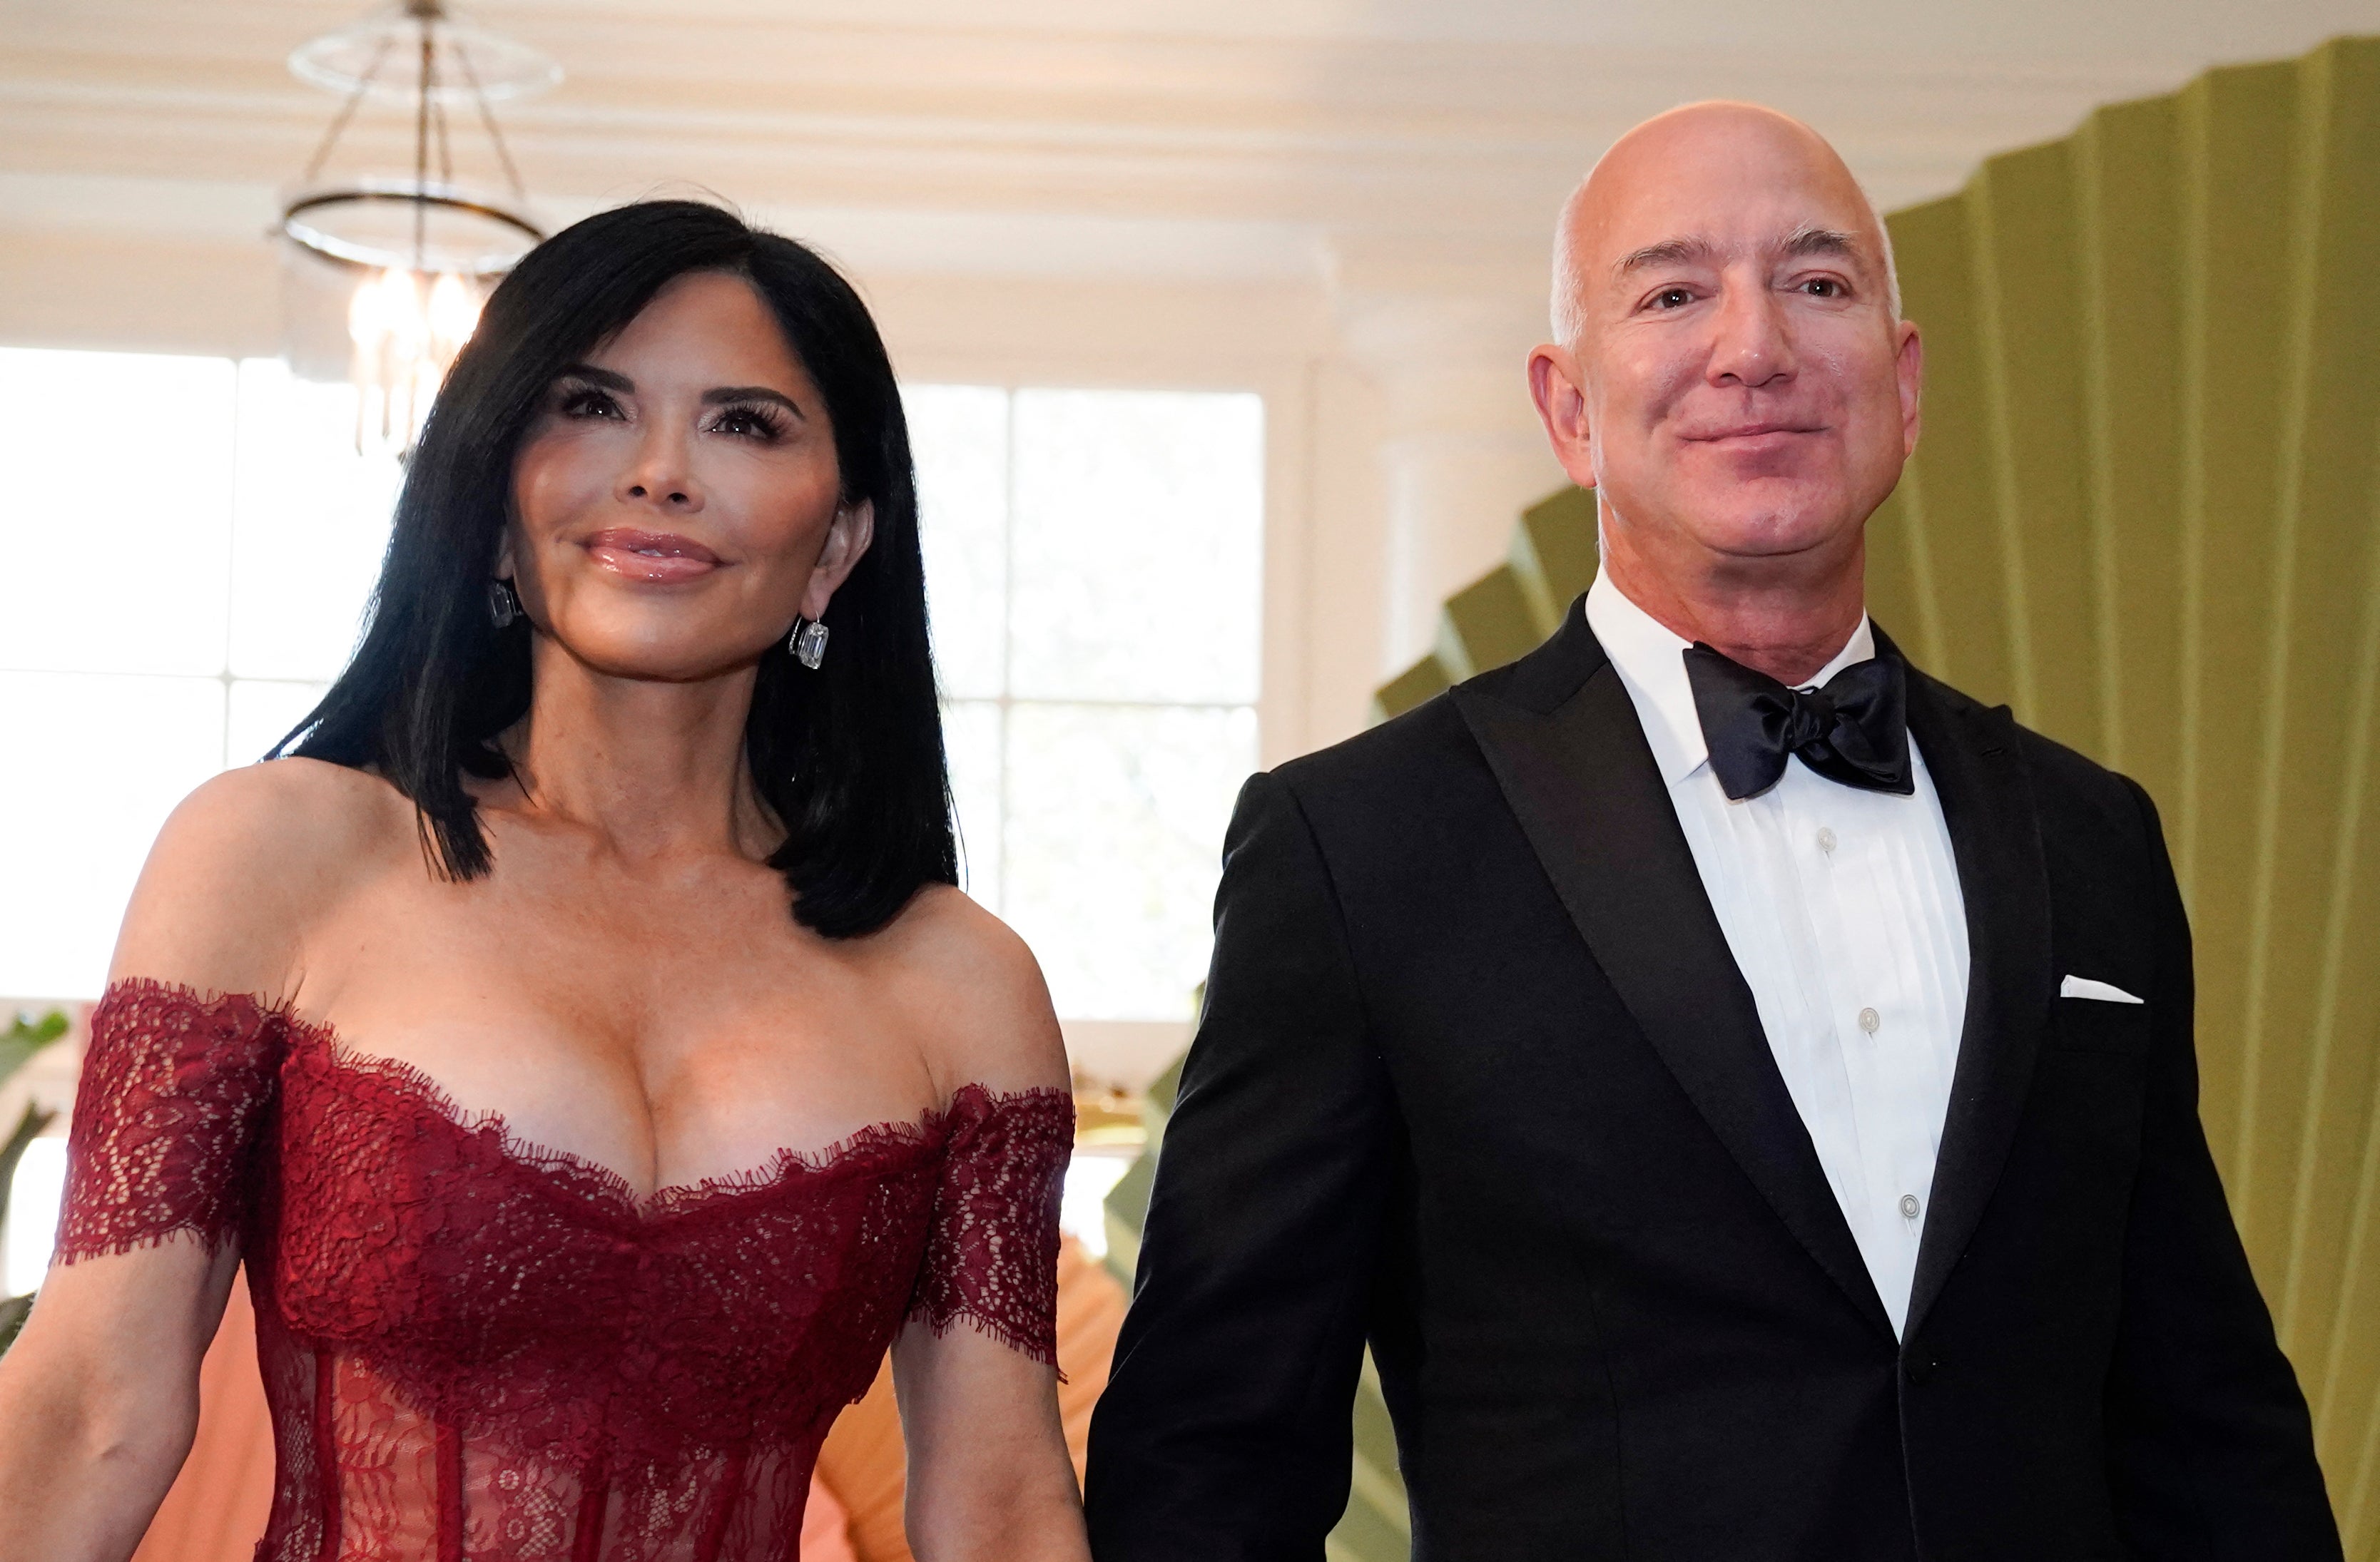 Executive chairman of Amazon Jeff Bezos and actress Lauren Sanchez arrive for a State Dinner in honour of Japanese Prime Minister Fumio Kishida, at the Booksellers Room of the White House in Washington, DC, on 10 April 2024